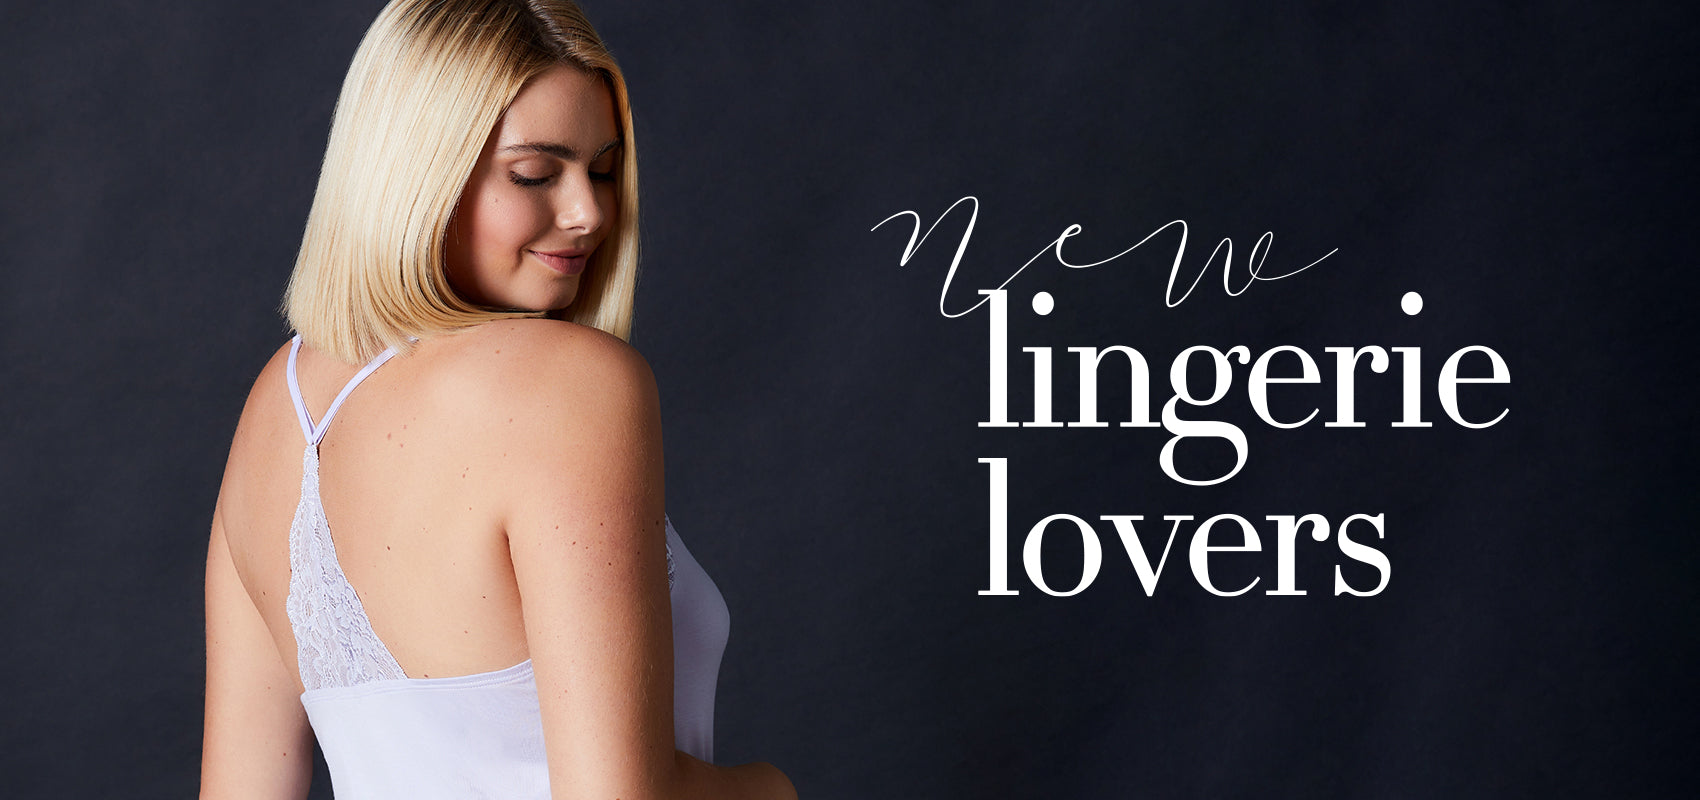 For New Lingerie Lovers - Our Newest Category at Journelle